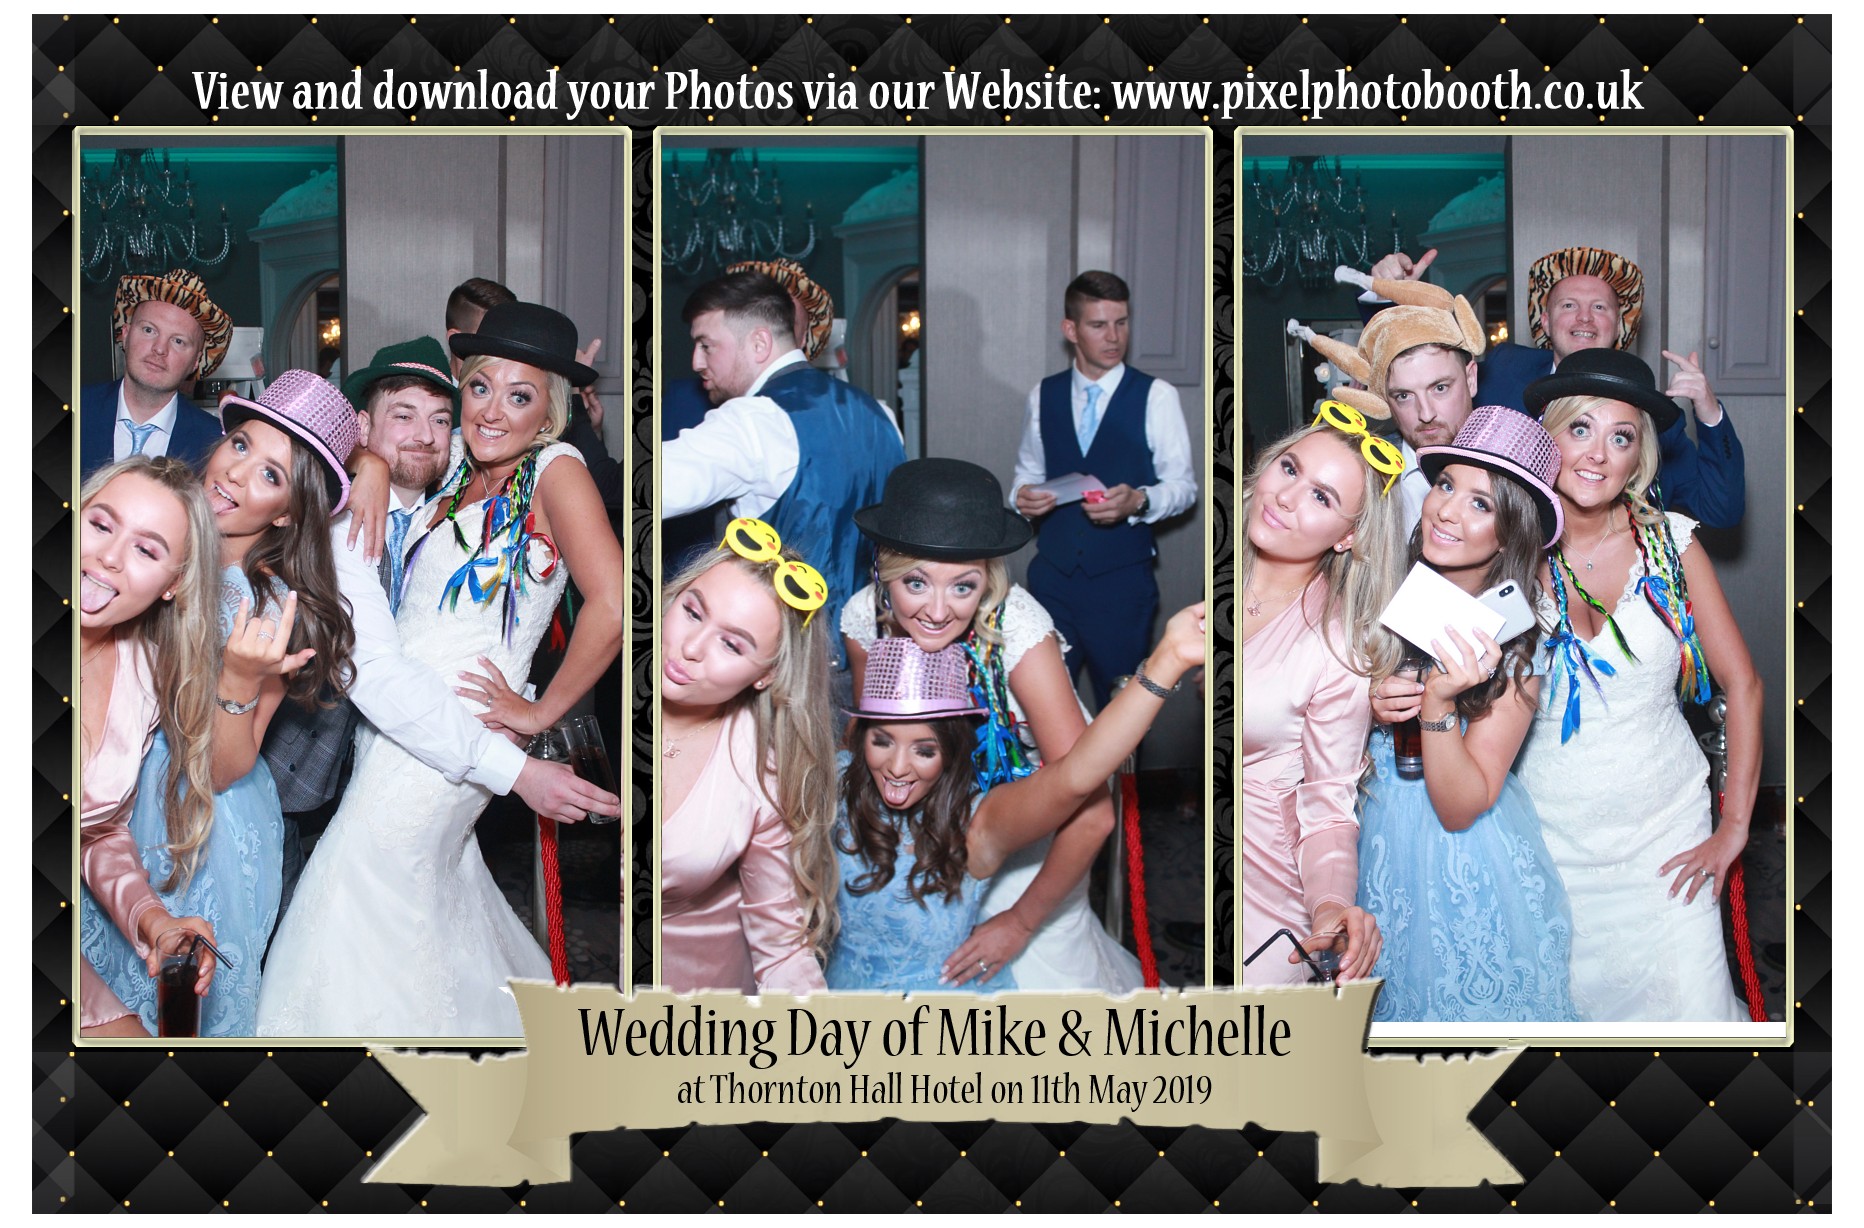 11th May 2019: Mike and Michelle's Wedding at Thornton Hall